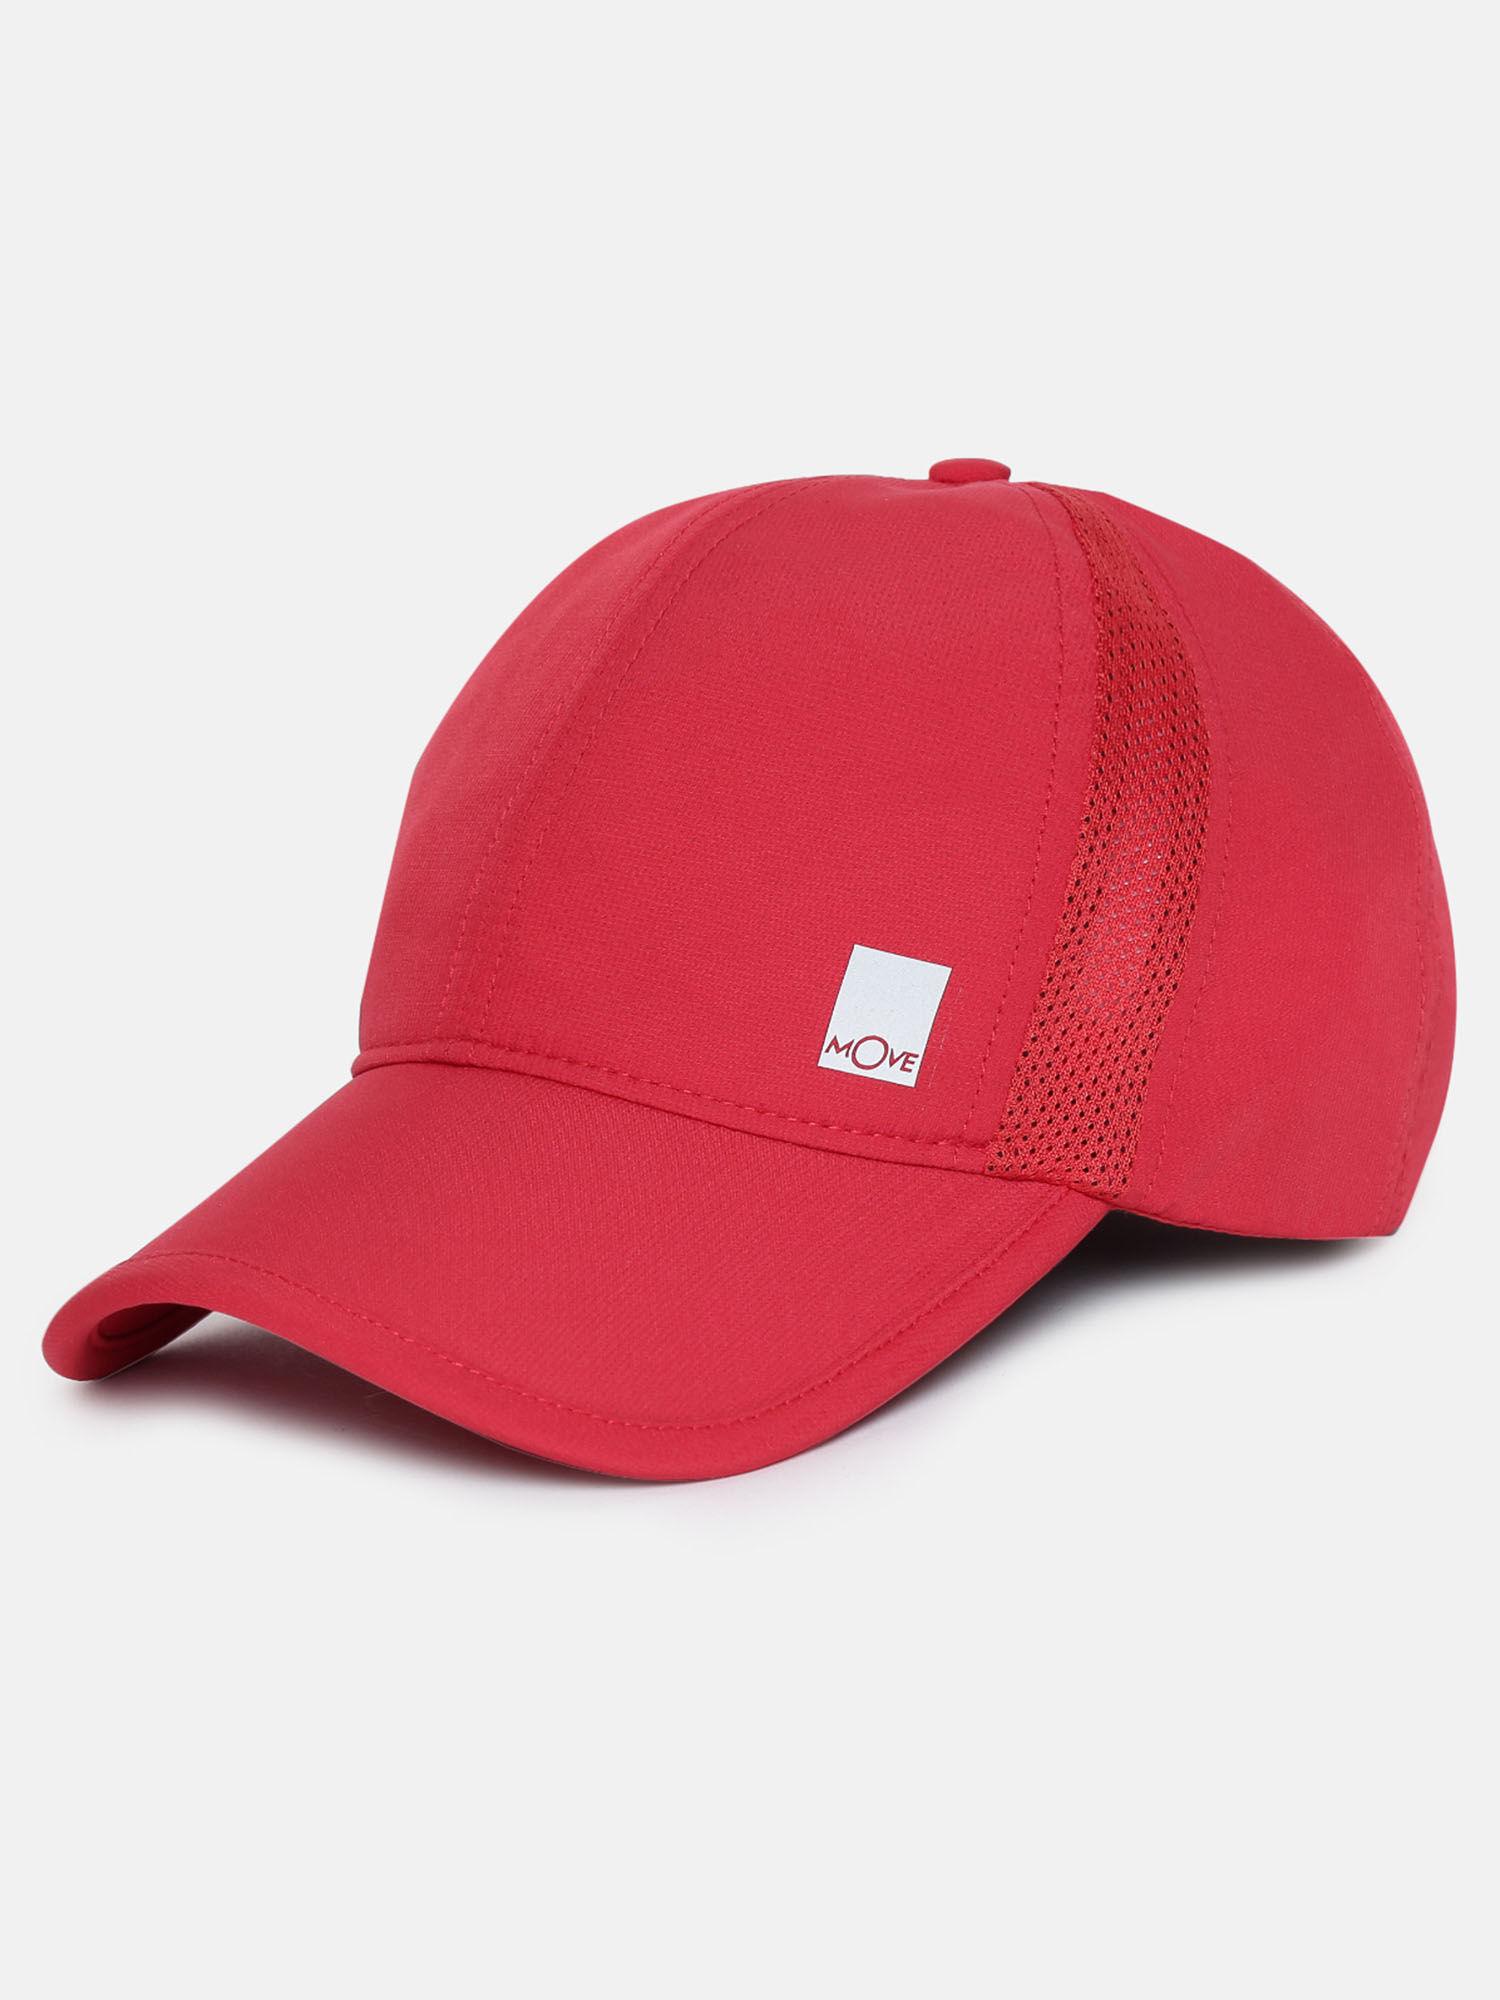 cp21 polyester solid cap with adjustable back closure and stay dry bright red